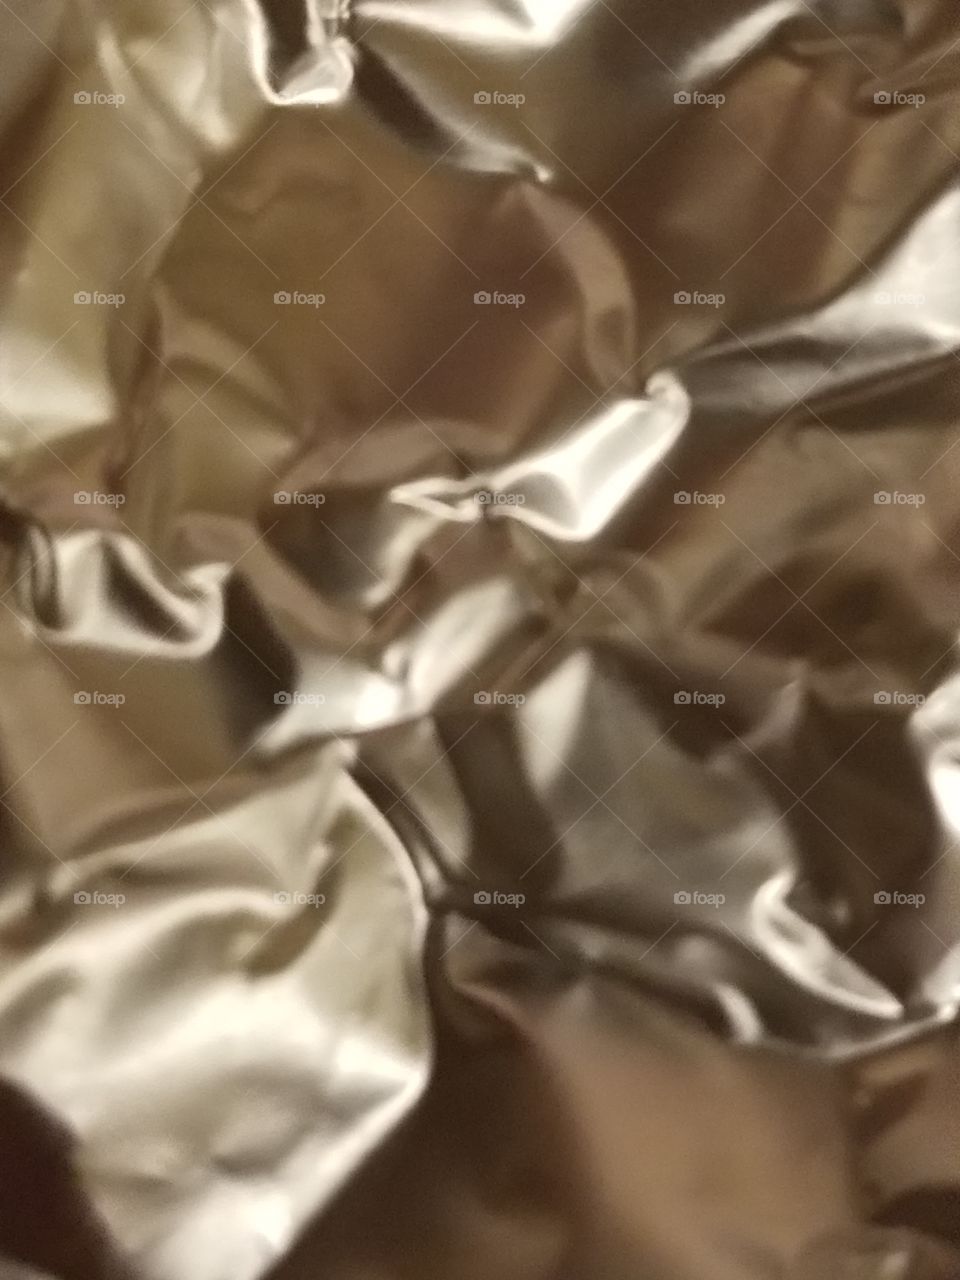 Foiled by aluminum